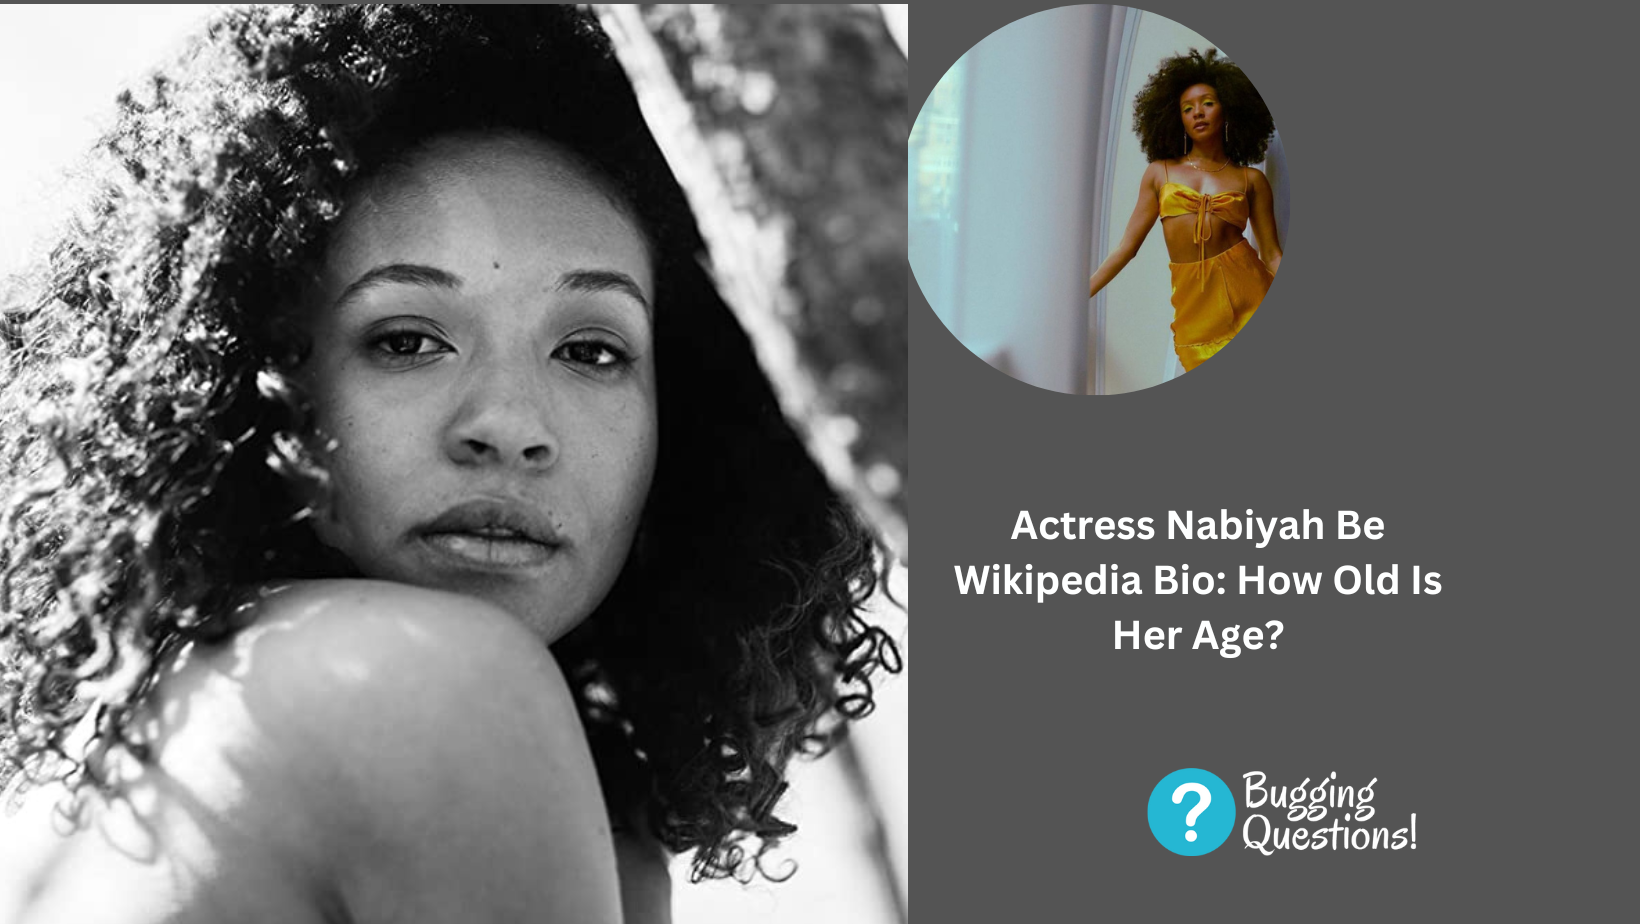 Actress Nabiyah Be Wikipedia Bio: How Old Is Her Age?